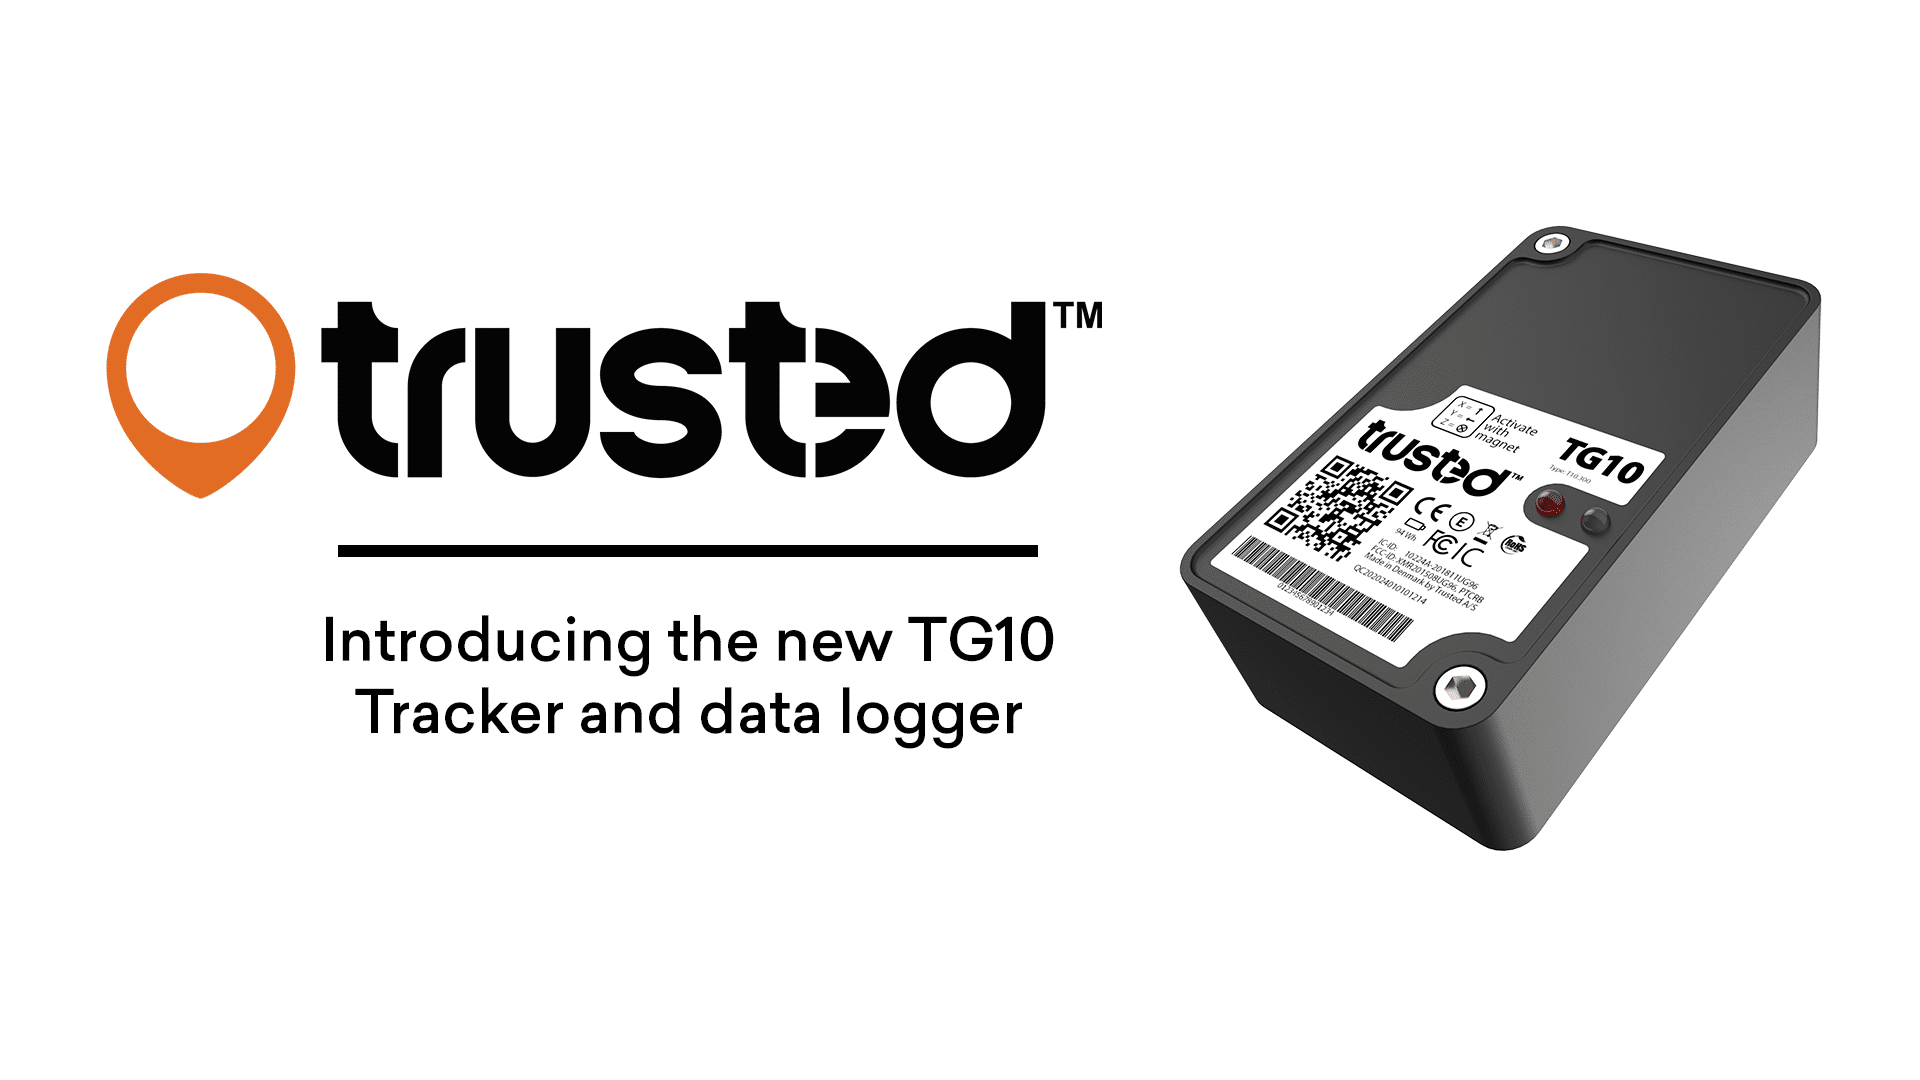 TG10 from Trusted revolutionizes battery-powered tracking for business